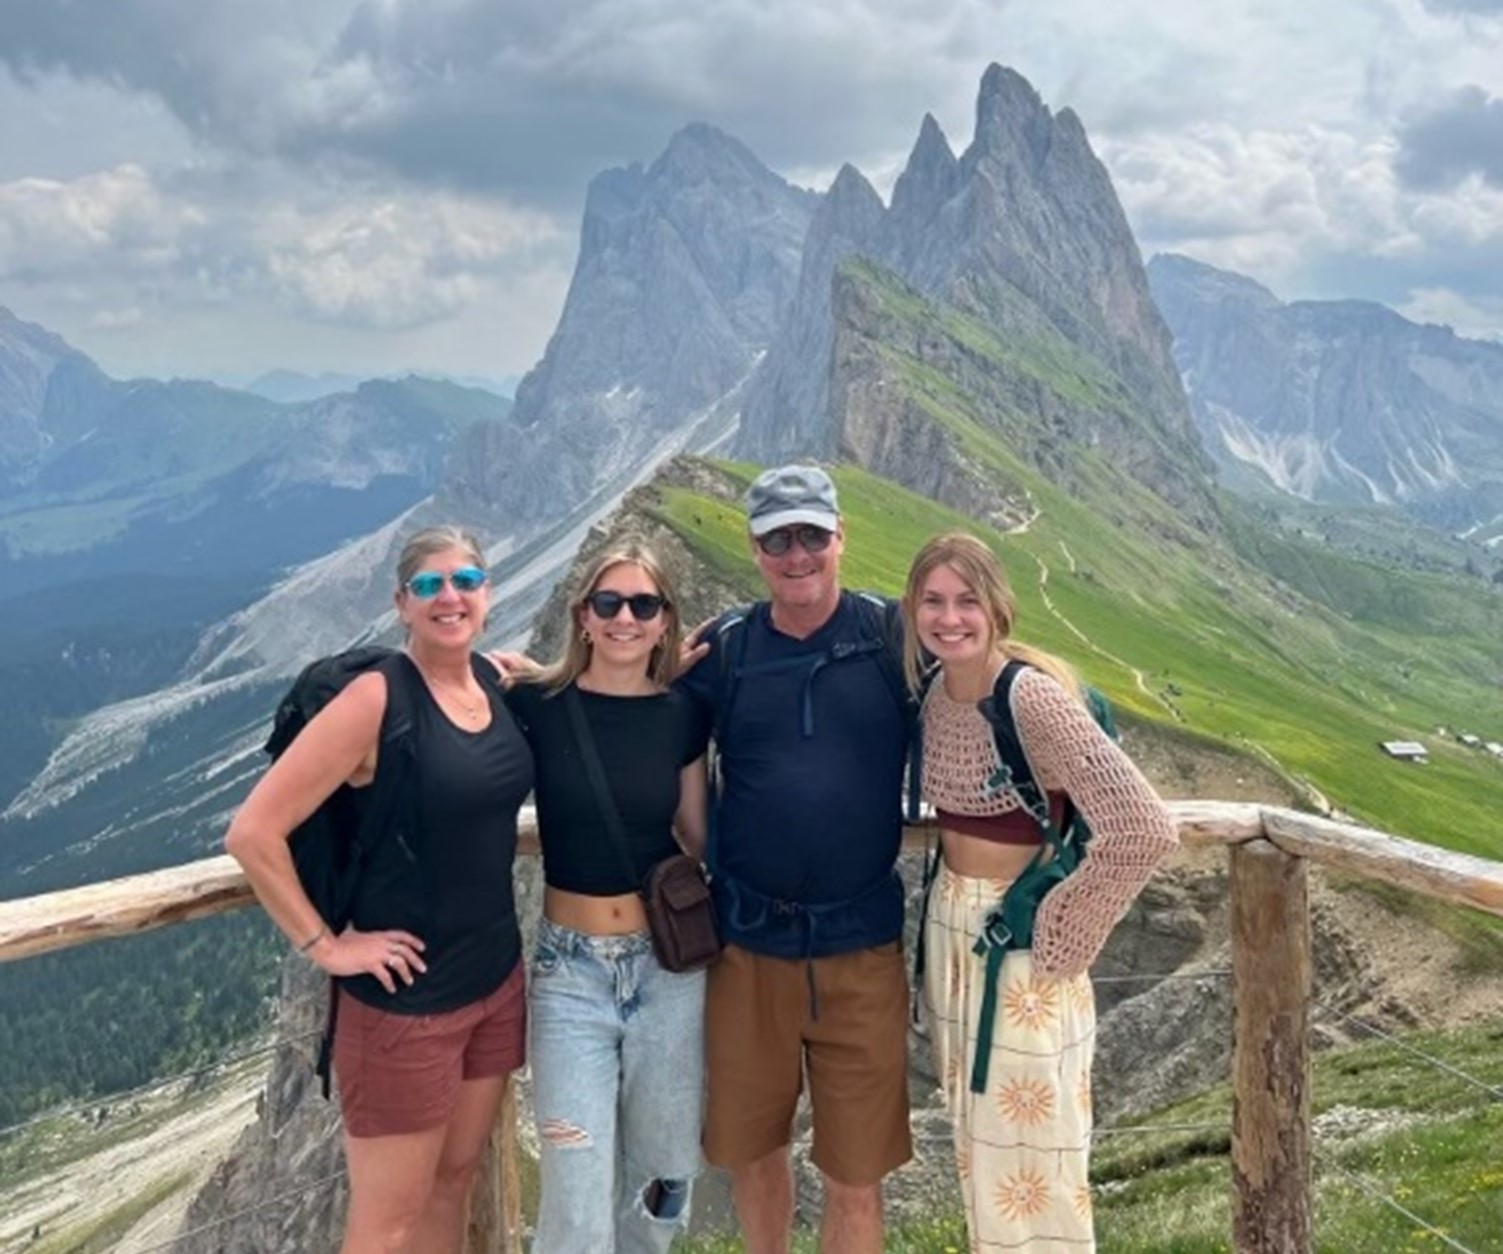 Keith with two daughters and wife standing in from of mountains smiling